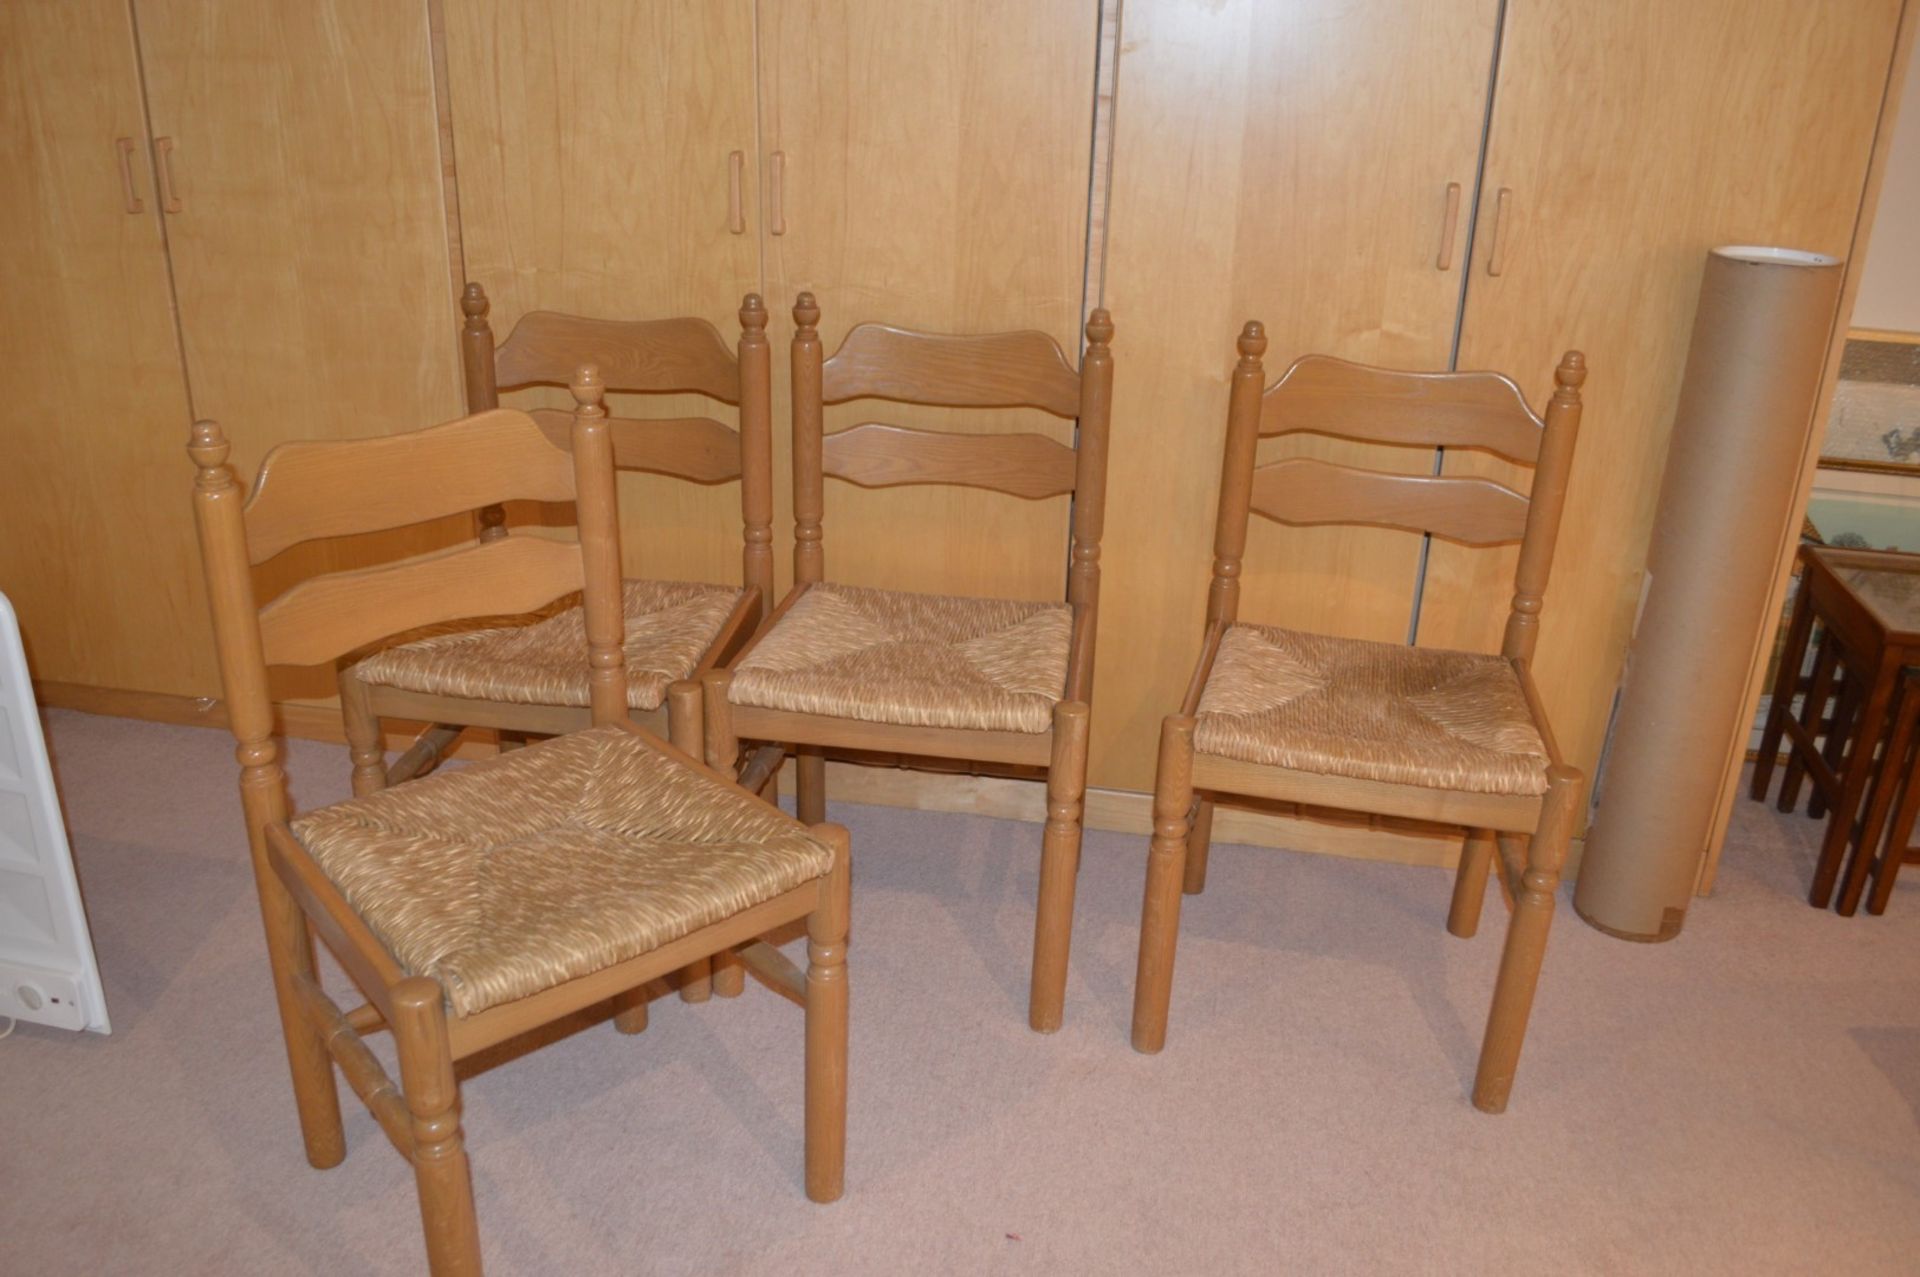 4 x Wooden Chairs With Thatched Seats - CL368 - Bowdon WA14 - NO VAT - Image 2 of 3